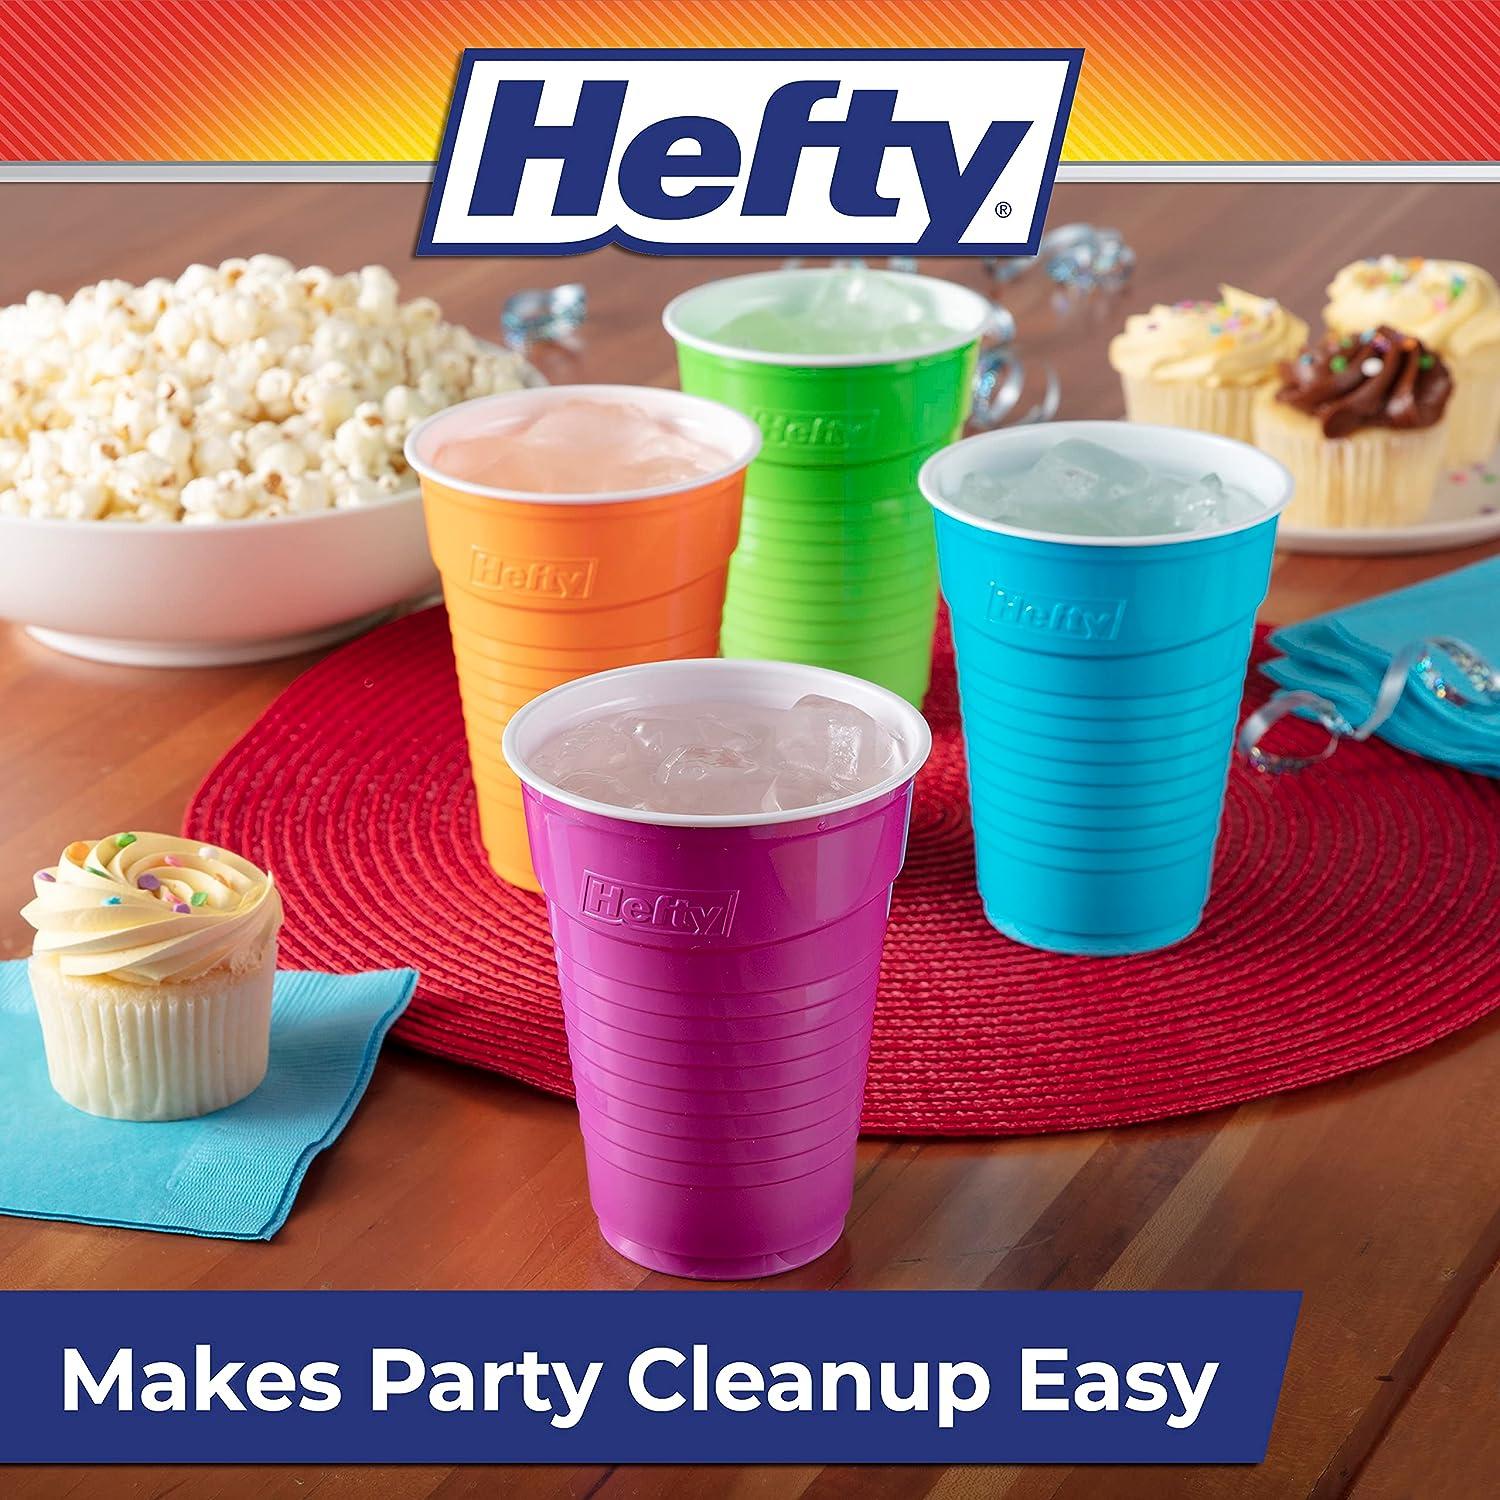 Hefty Party On Disposable Plastic Cups, Assorted, 16 Ounce, 100 Count -  Vibrant